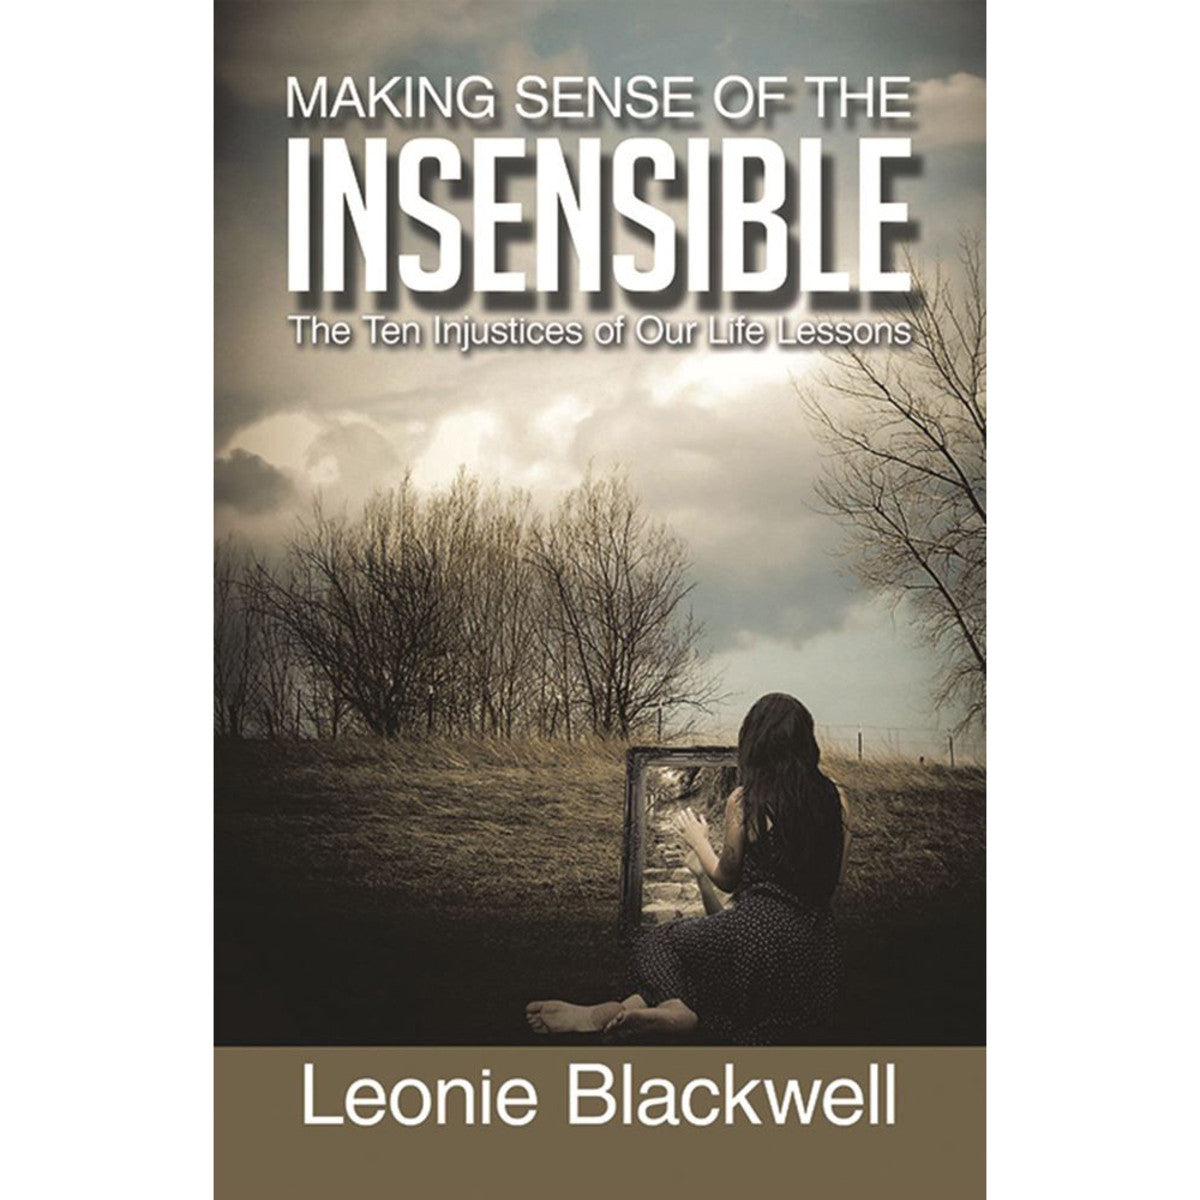 Making Sense of the Insensible: The Ten Injustices of our Life Lessons by Leonie Blackwell